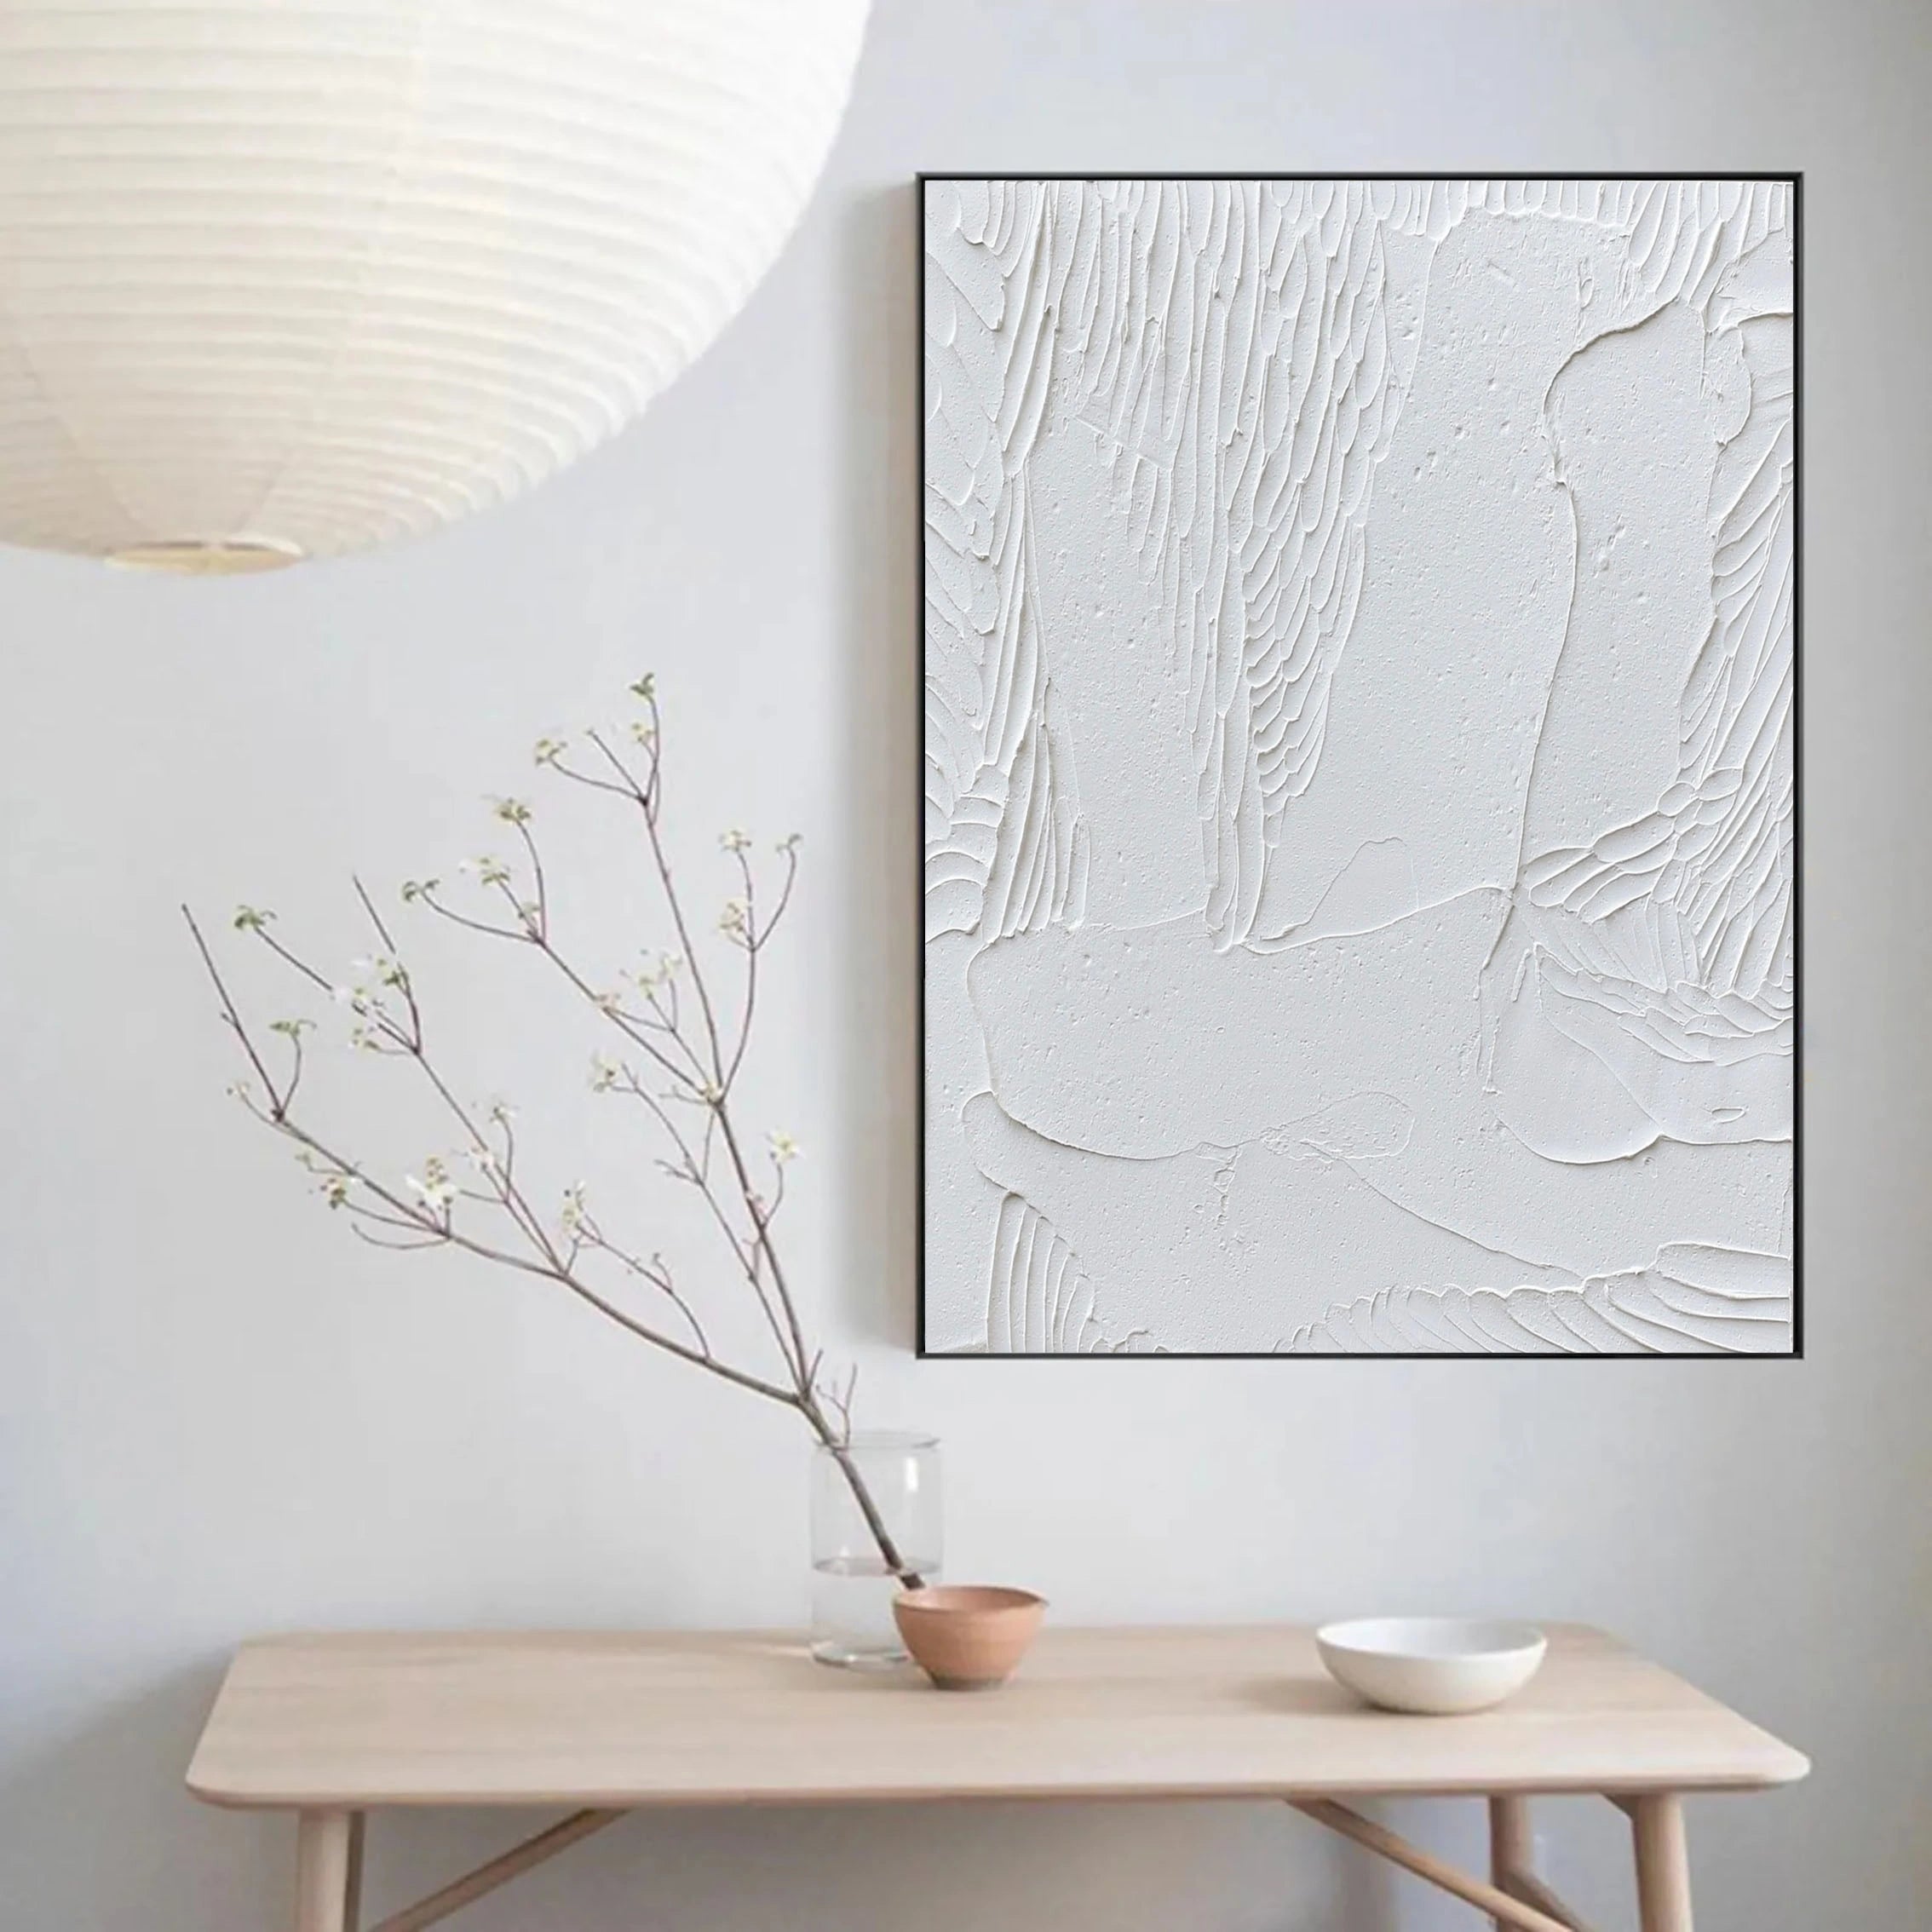 3D Textured White Plaster Art Wall Decor Painting on Canvas Original